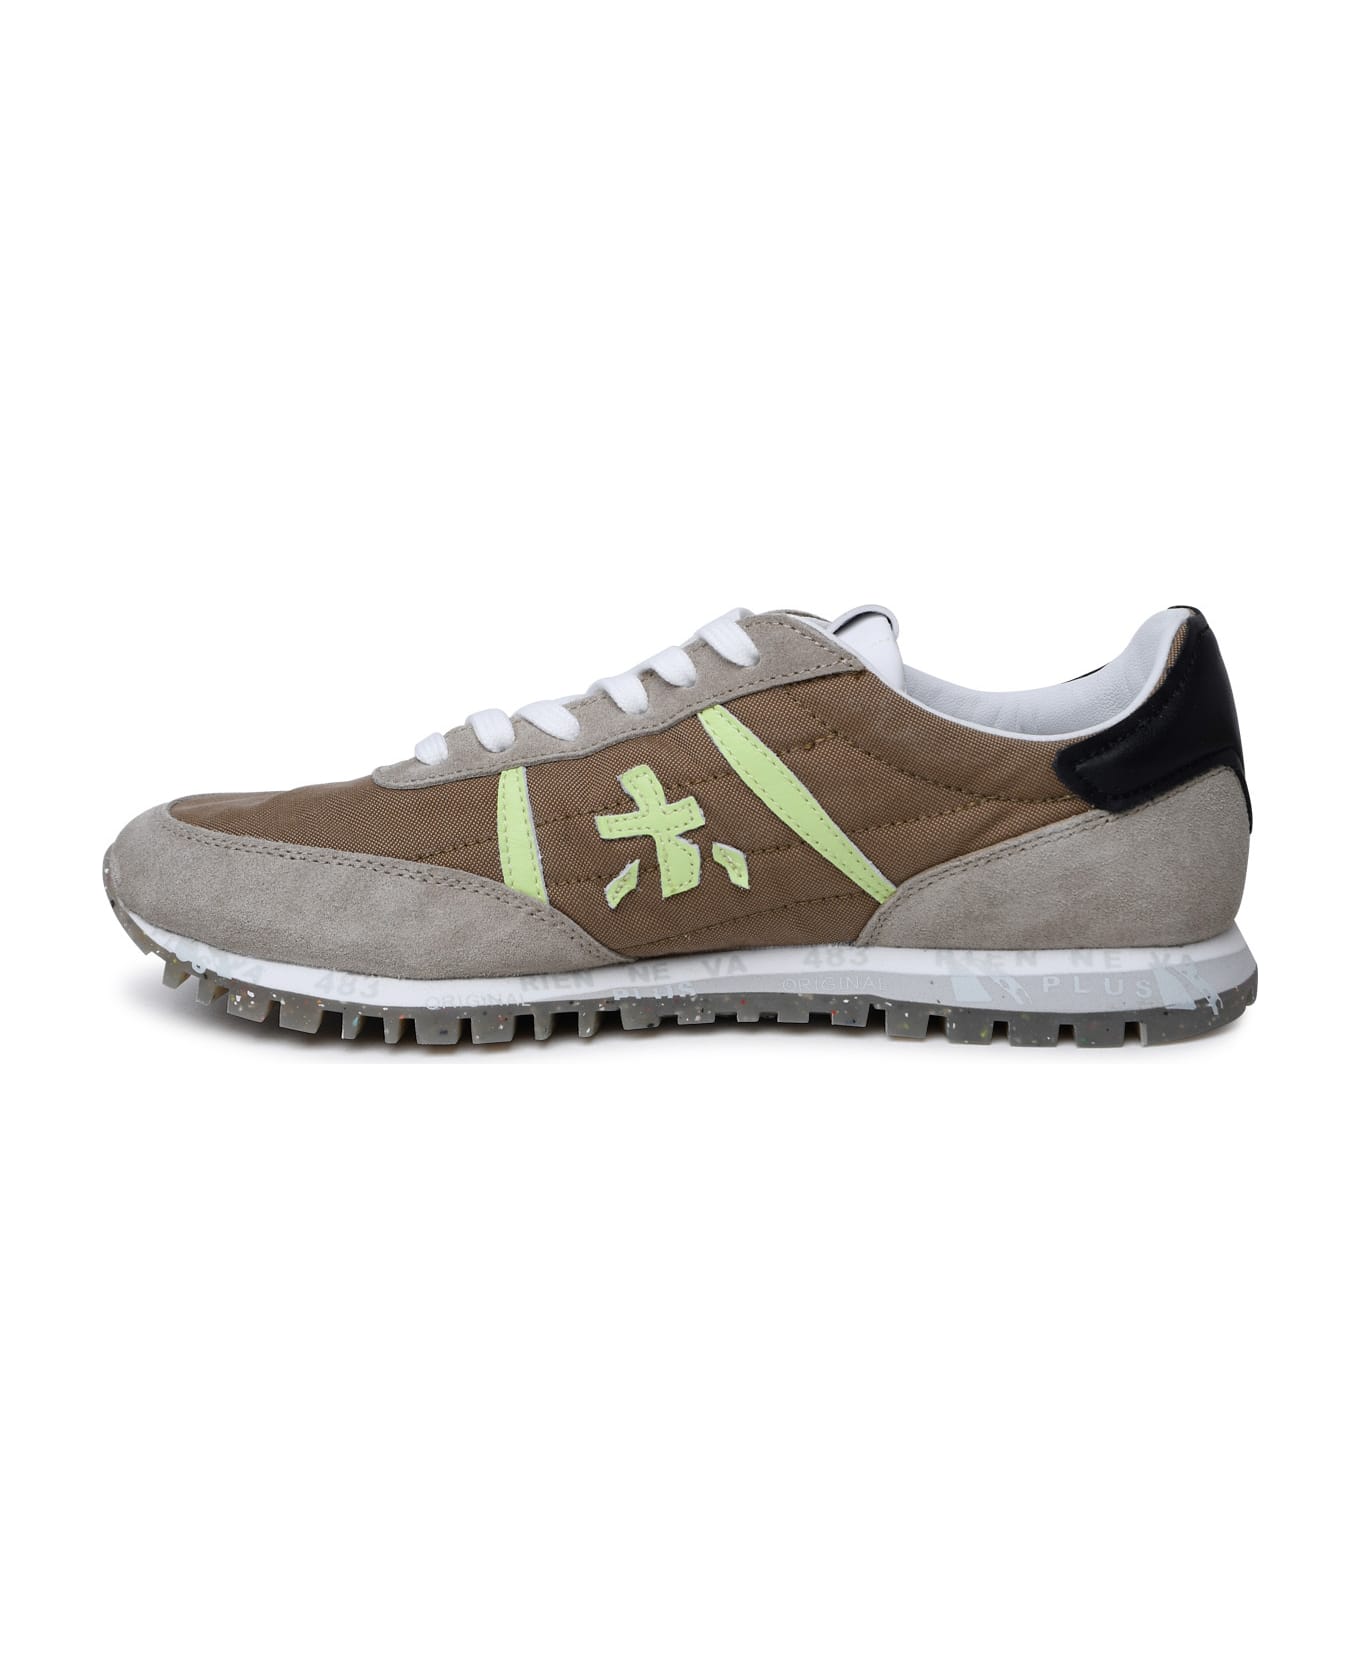 Premiata 'sean' Brown Leather And Fabric Sneakers - Brown